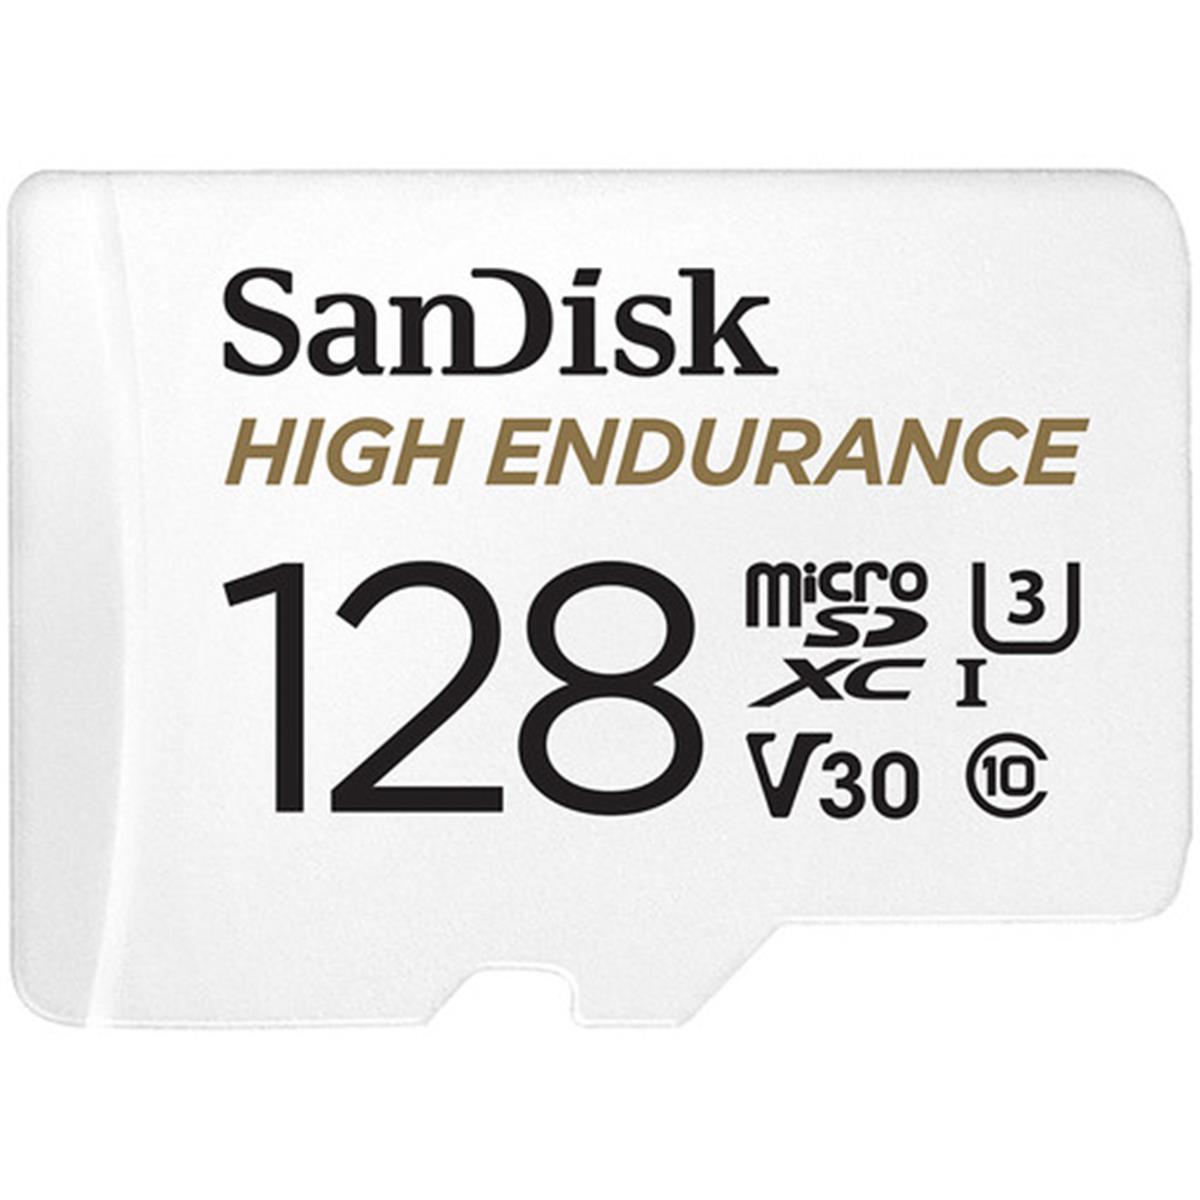 Picture of Sandisk SDSQQNR-128G-AN6IA 128GB High Endurance UHS-I MicroSDXC Memory Card with SD Adapter